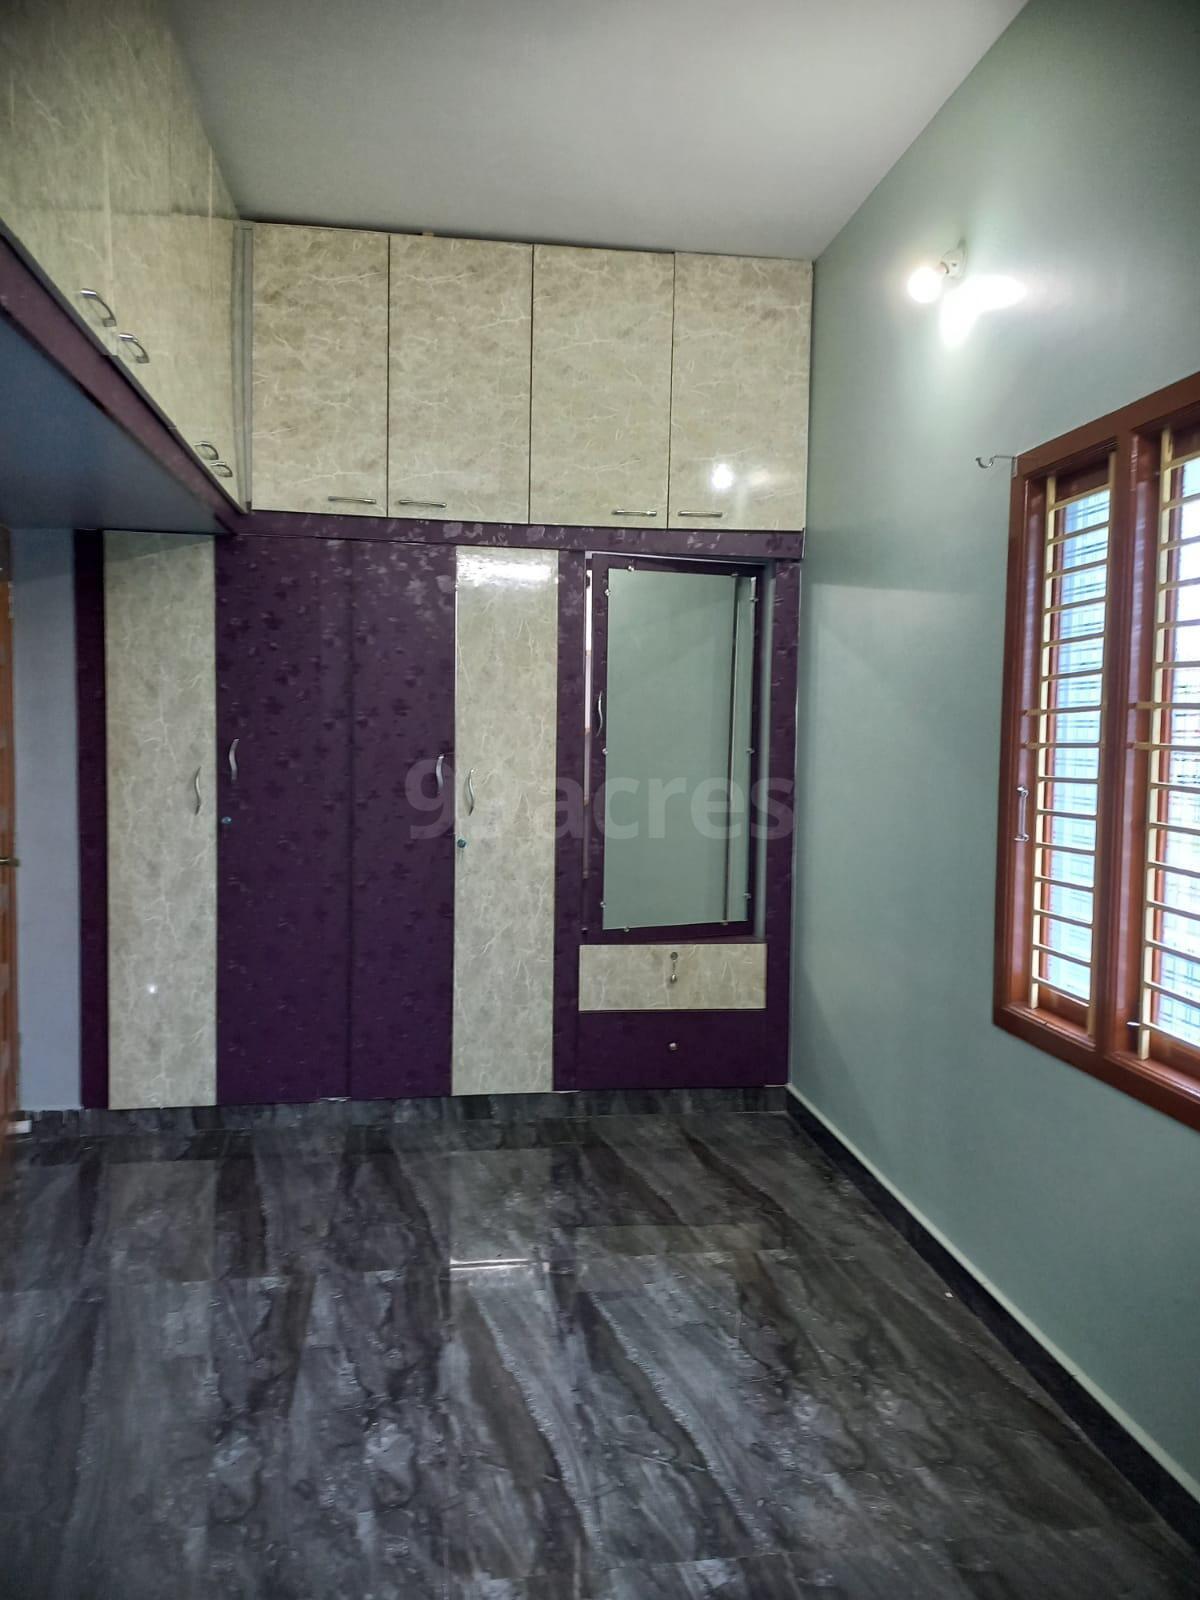 8038-for-sale-2BHK-Residential-Independent-House-Rs-6600000-in-Cuddalore-Cuddalore-Cuddalore